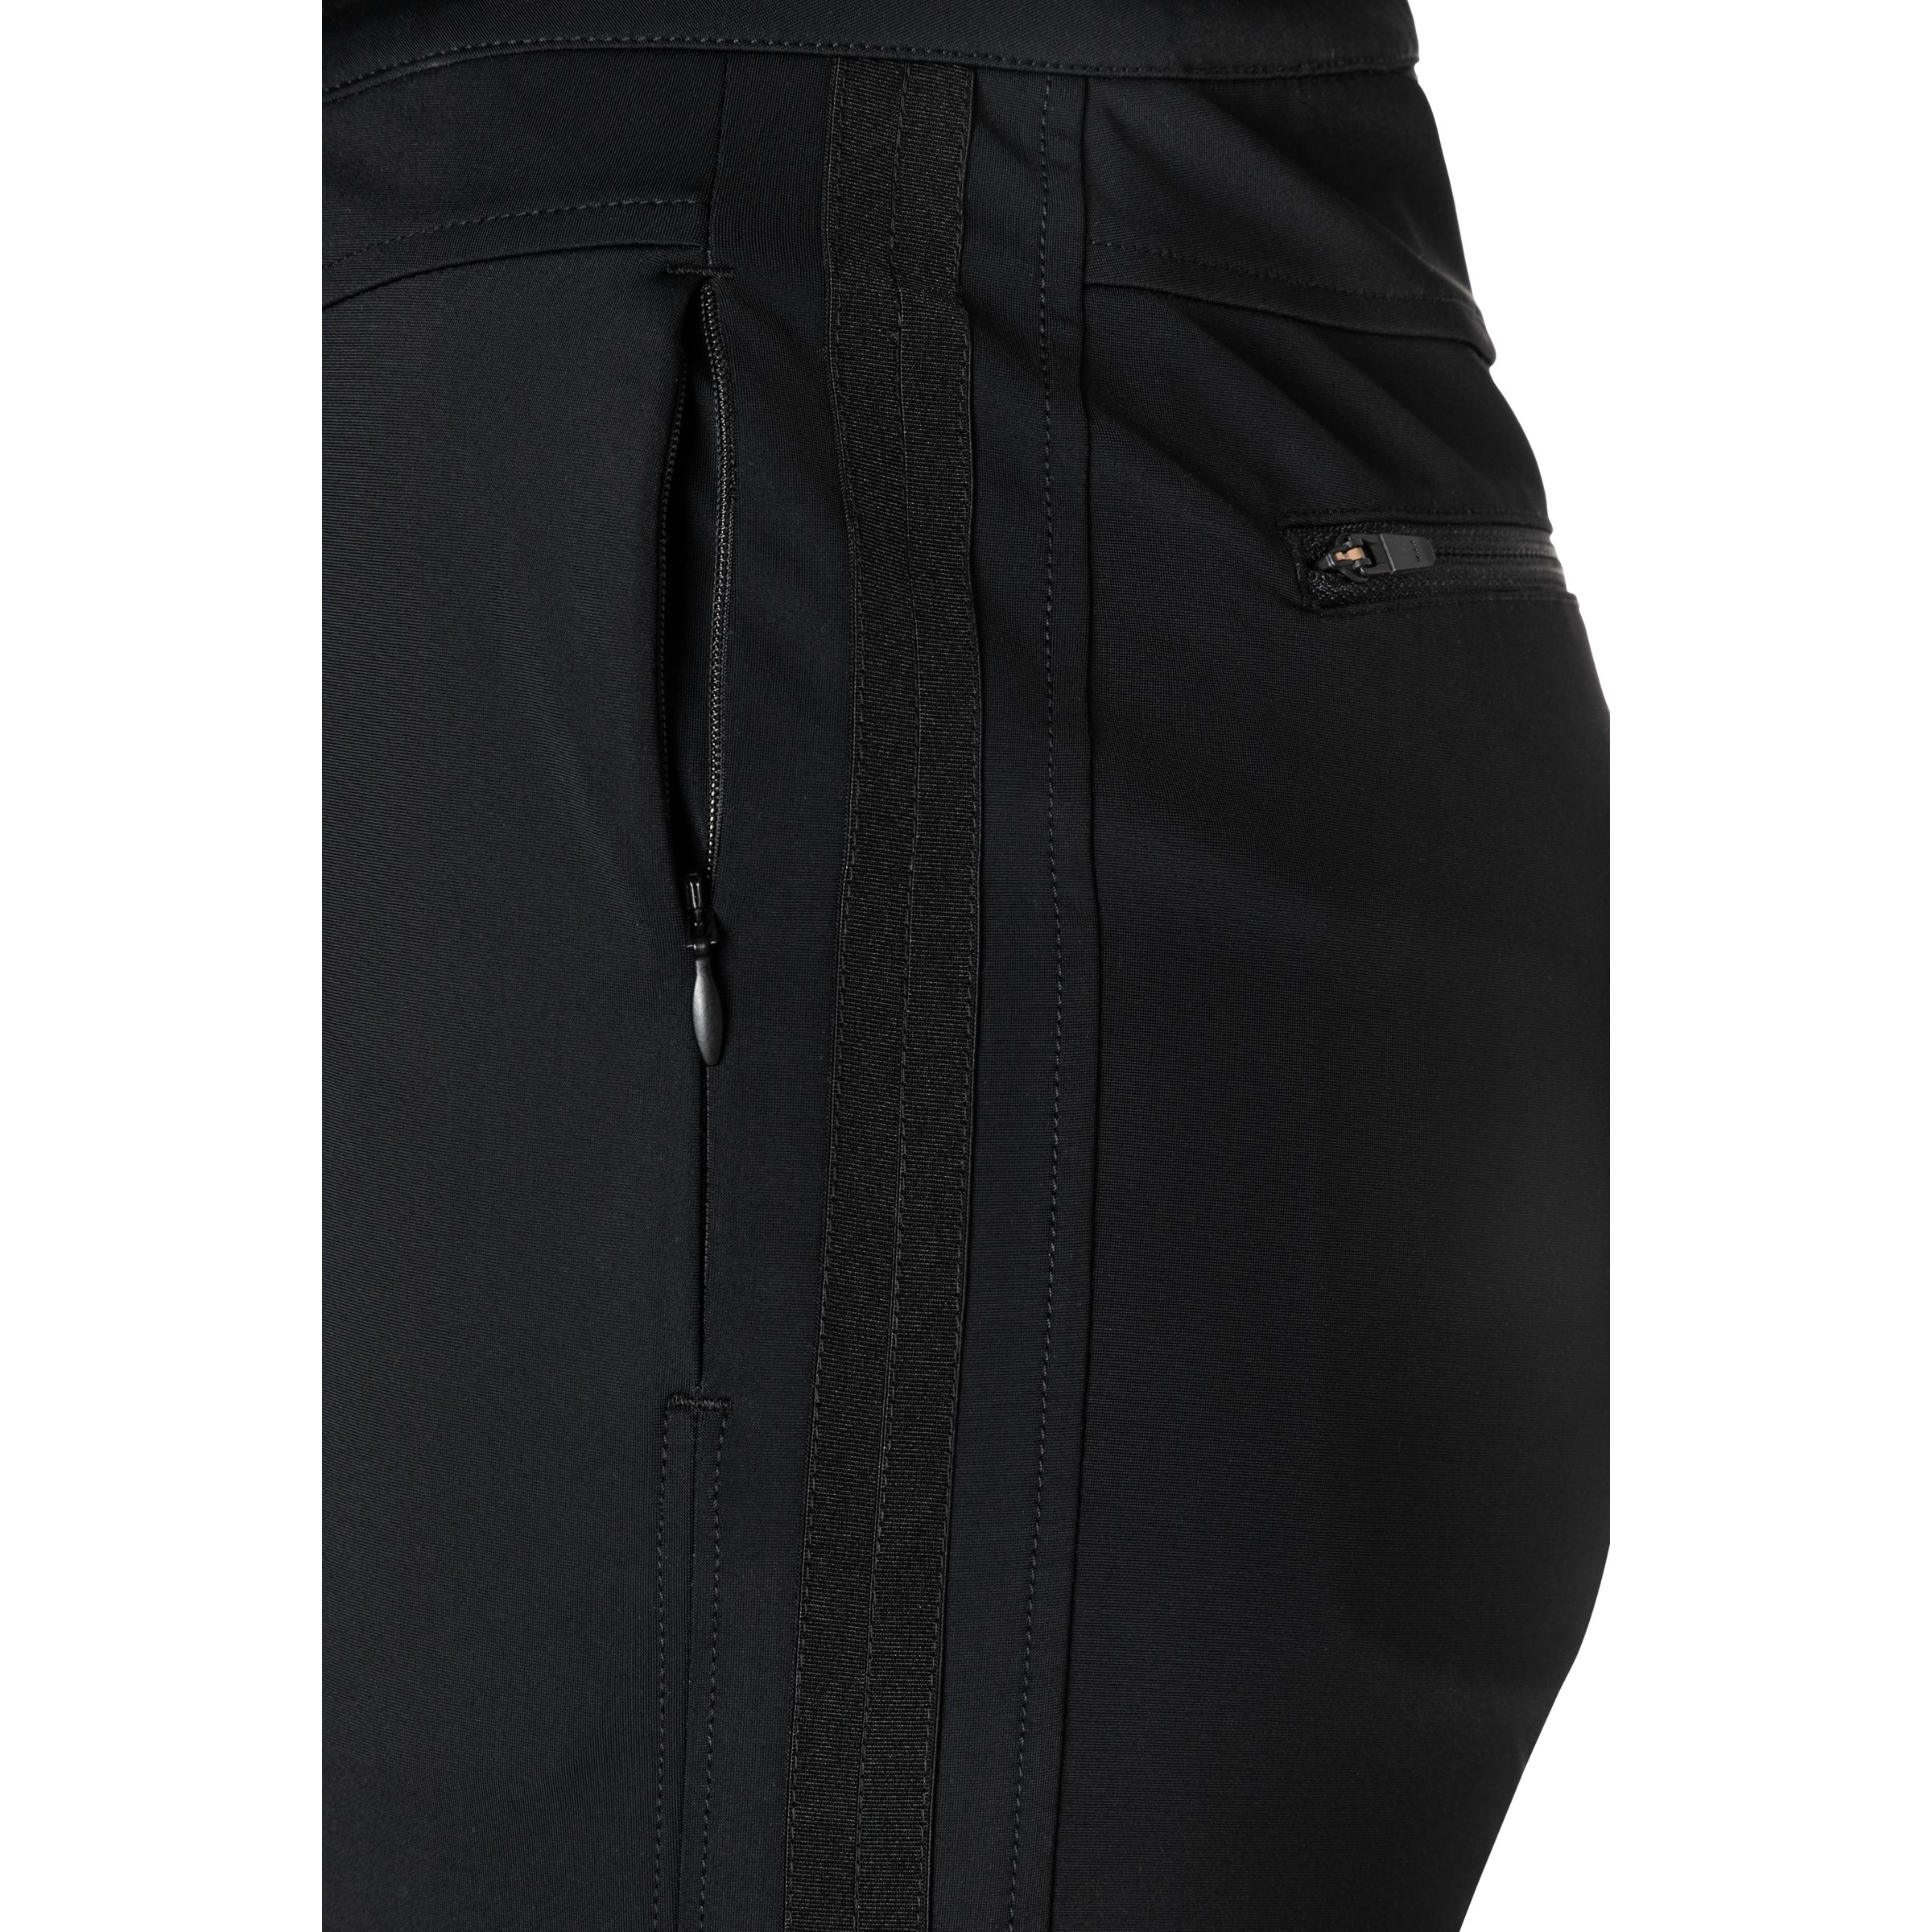 Hanorace & Pulovere -  bogner fire and ice AUGUSTE Performance Trousers